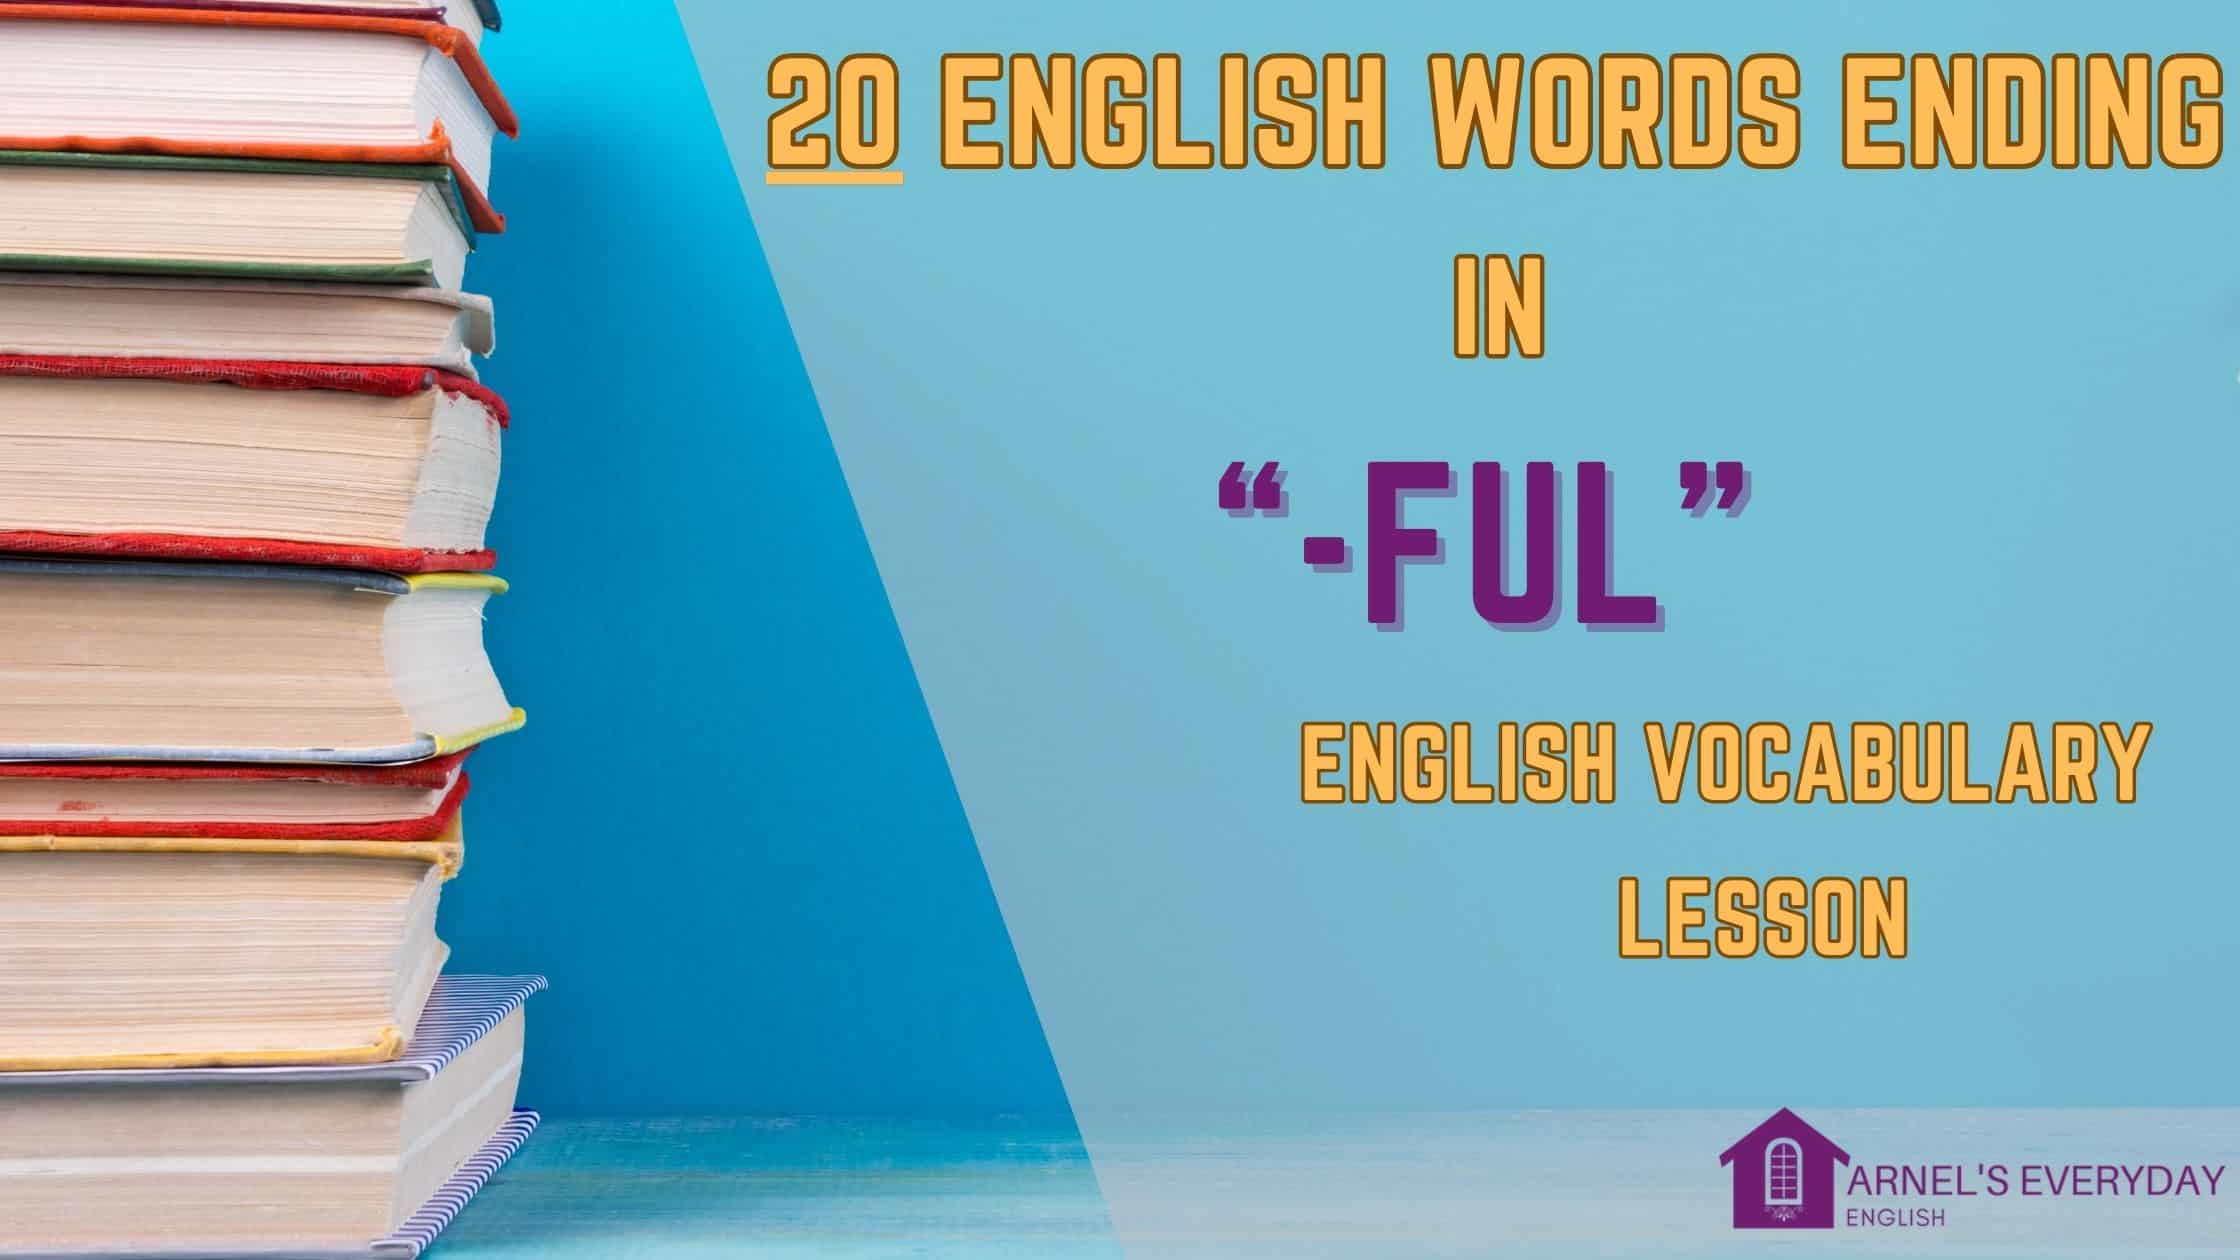 20 English Words Ending in ‘-ful’